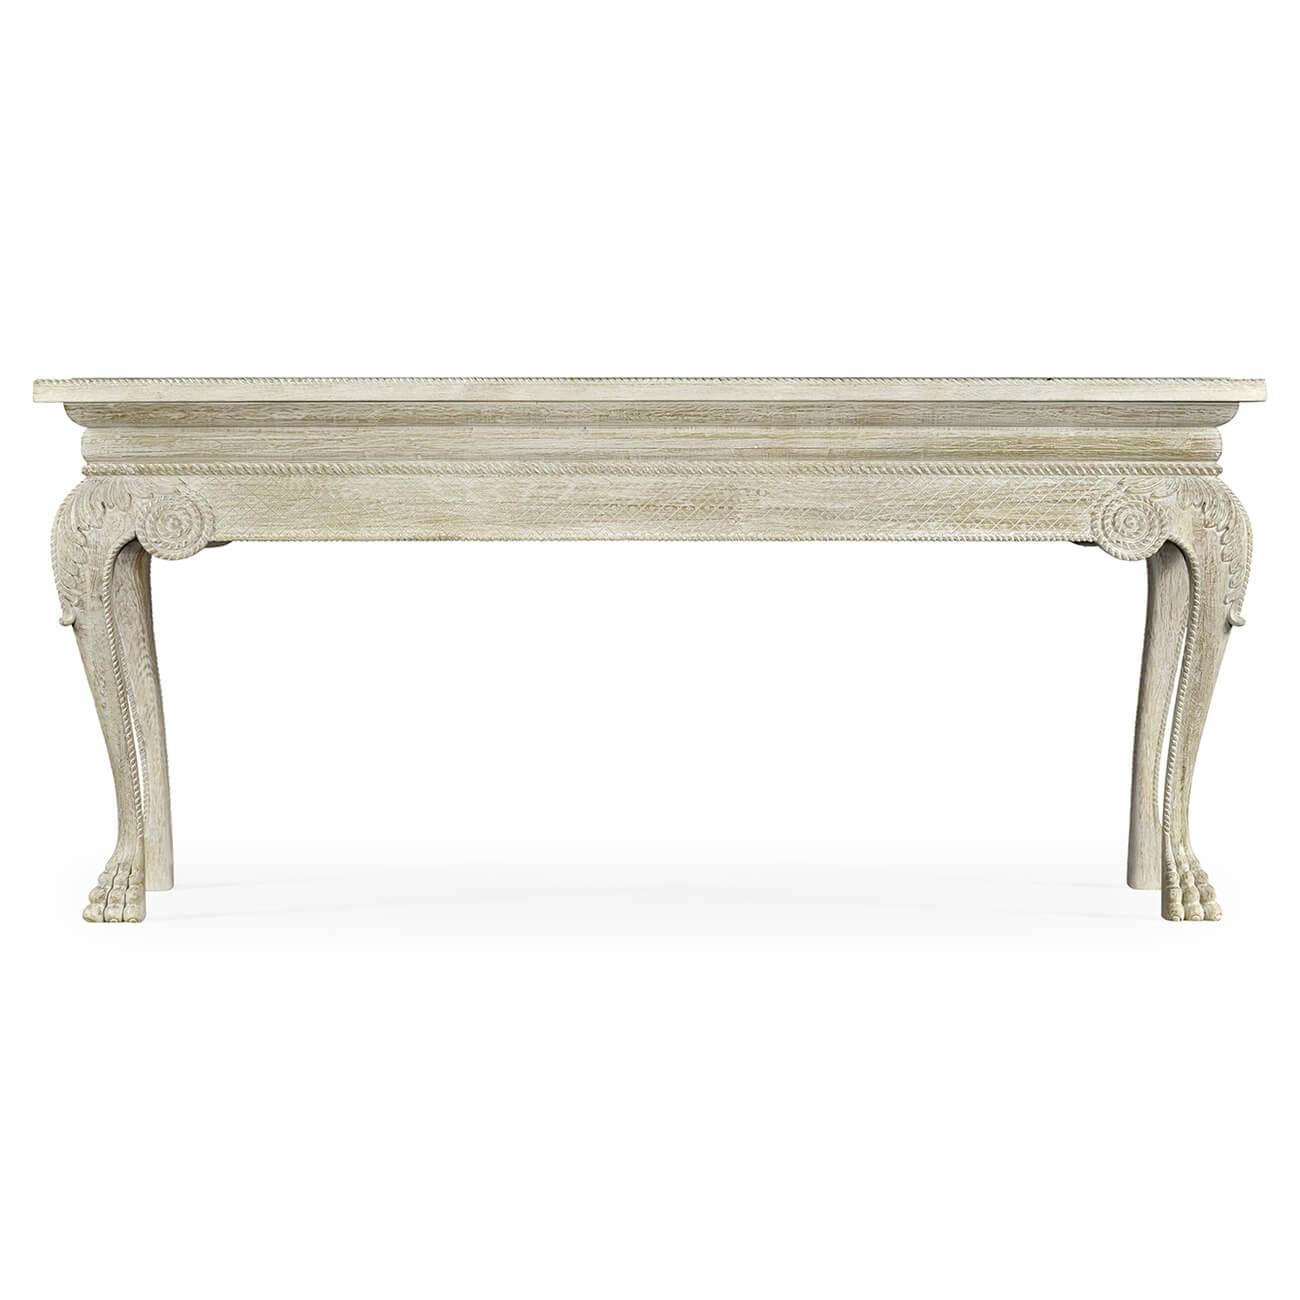 A Georgian style white painted oak console table with a white marble inset top, with an unusual rope-carved molding, a crosshatch carved frieze, carved acanthus knees on cabriole legs and carved lion paw feet.

Dimensions: 78